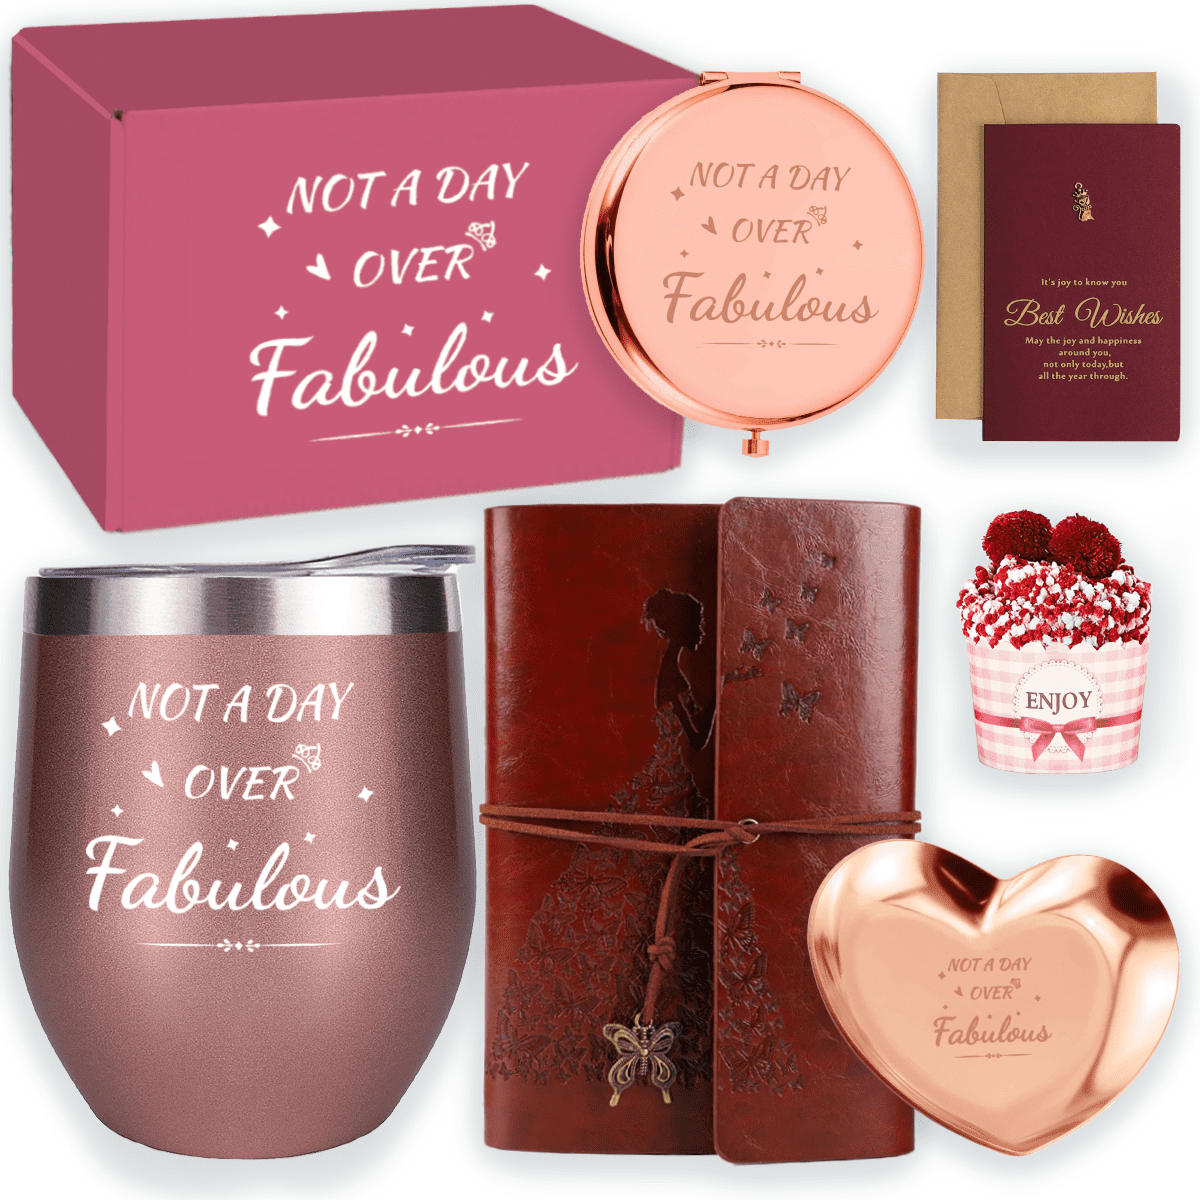 Christmas Gifts for Women Unique Holiday Gift Basket for Women, Her, Mom,  Wife, Girlfriend, Sister, Coworkers, Boss, Teacher, Nurse, Xmas Tumbler